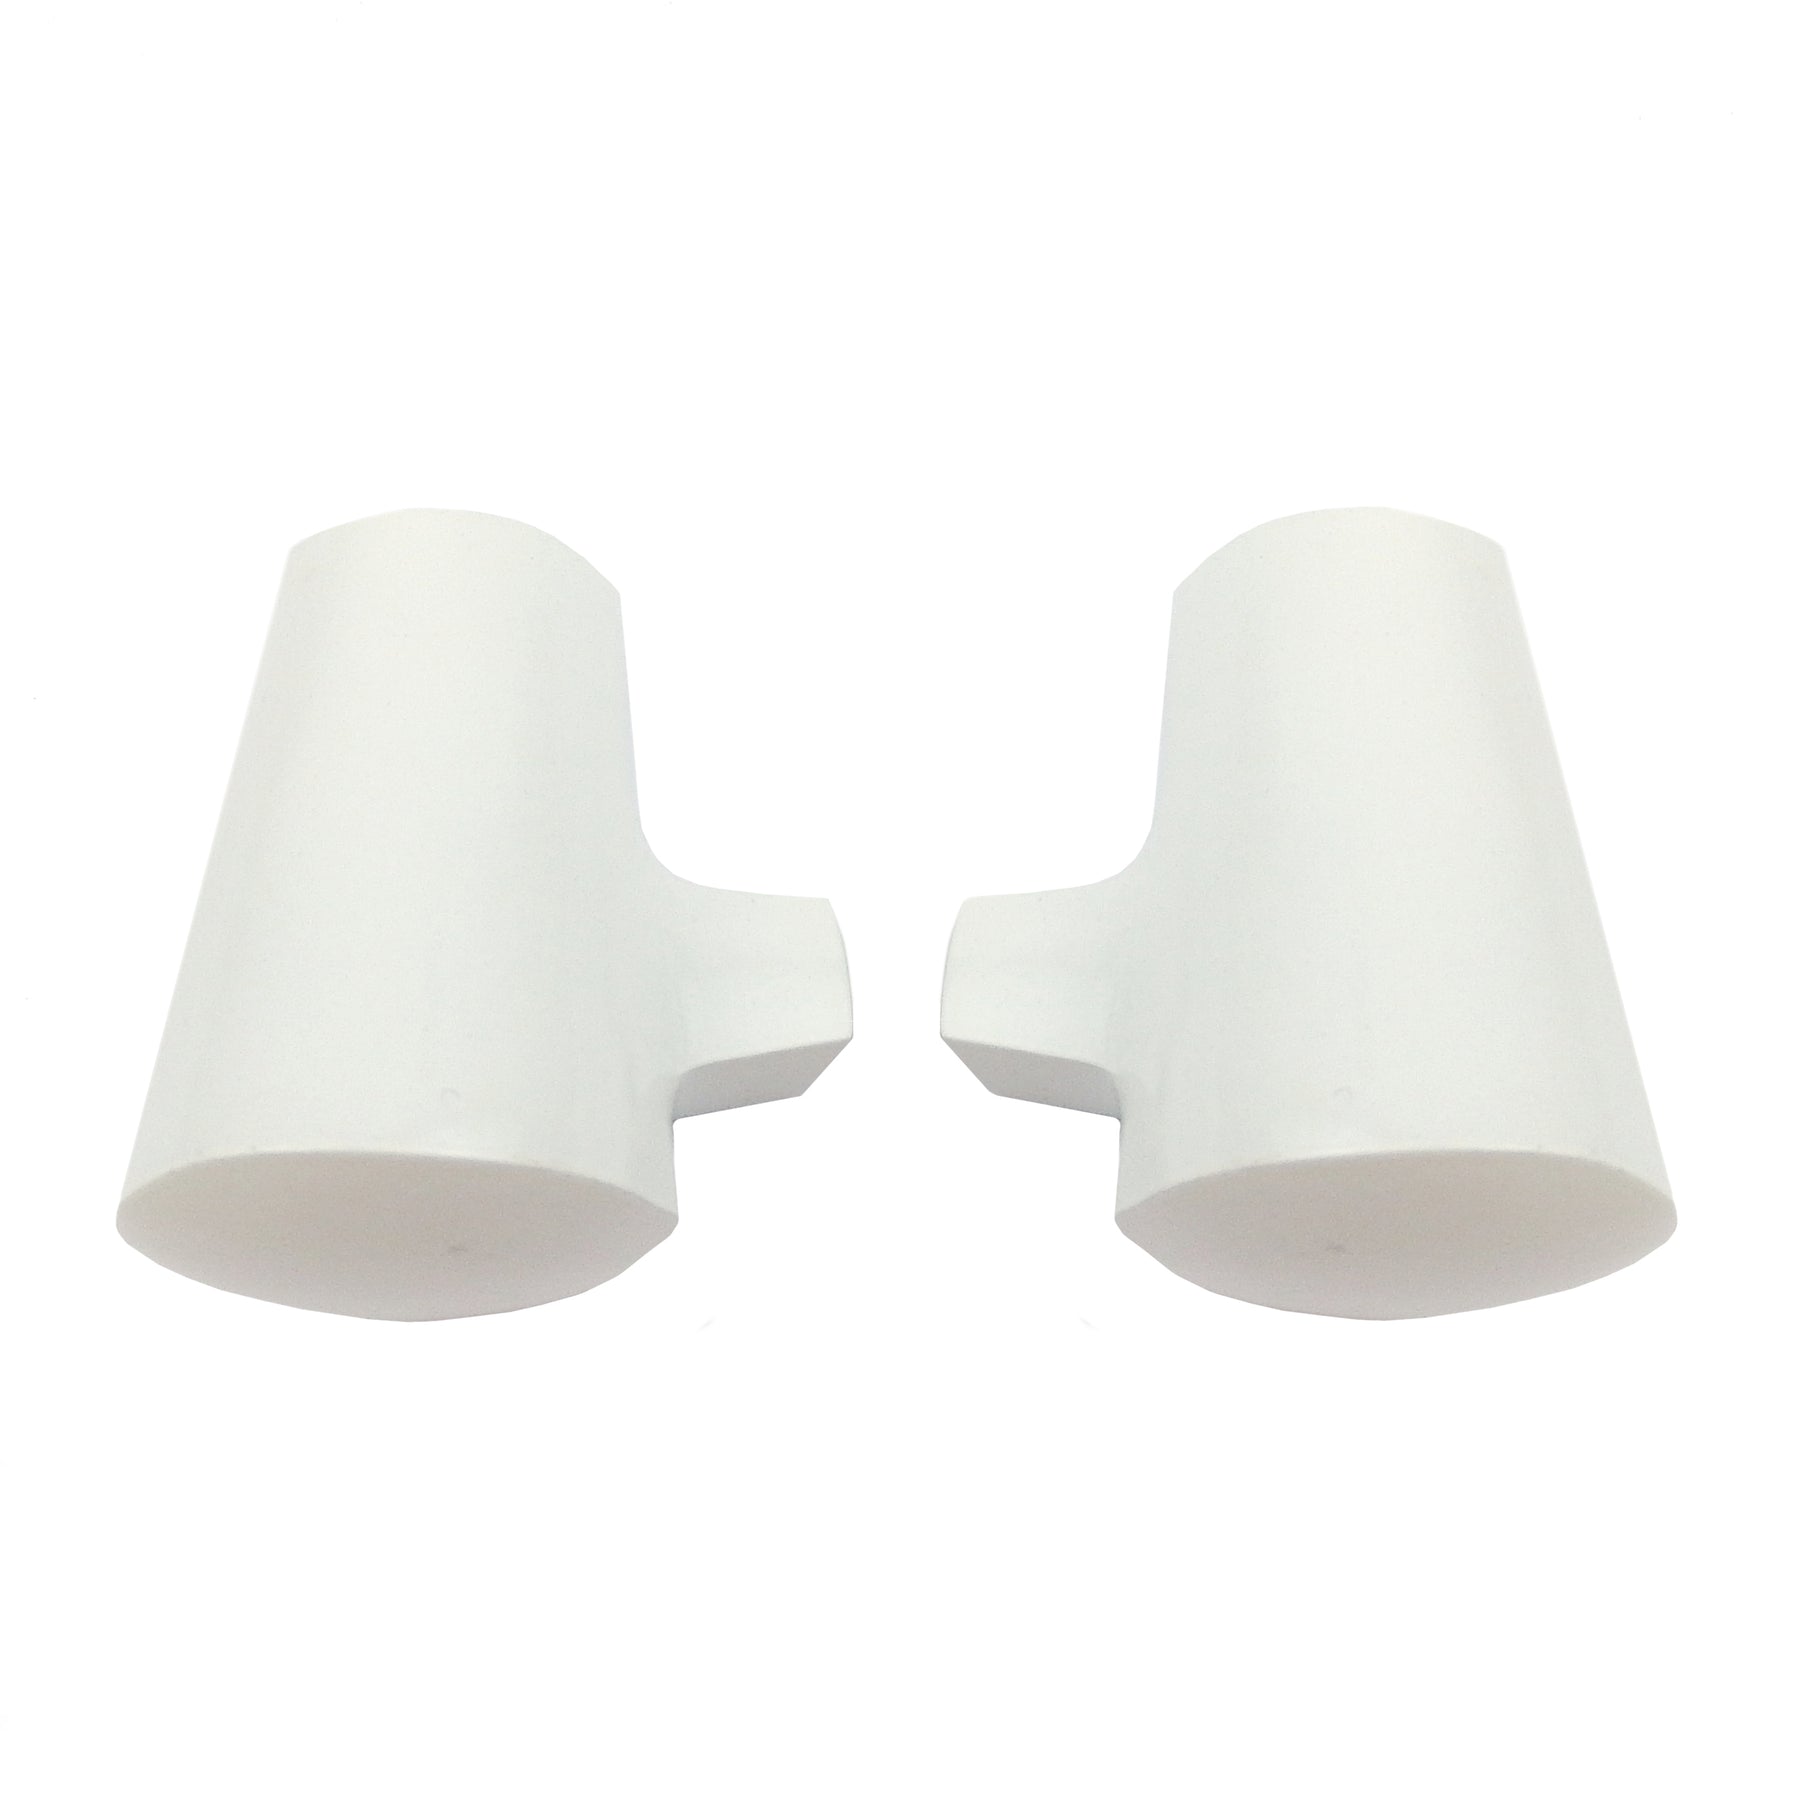 Vespa - Centre Stand - Feet Metal - White 22mm - Rounded - PK/PX/PE